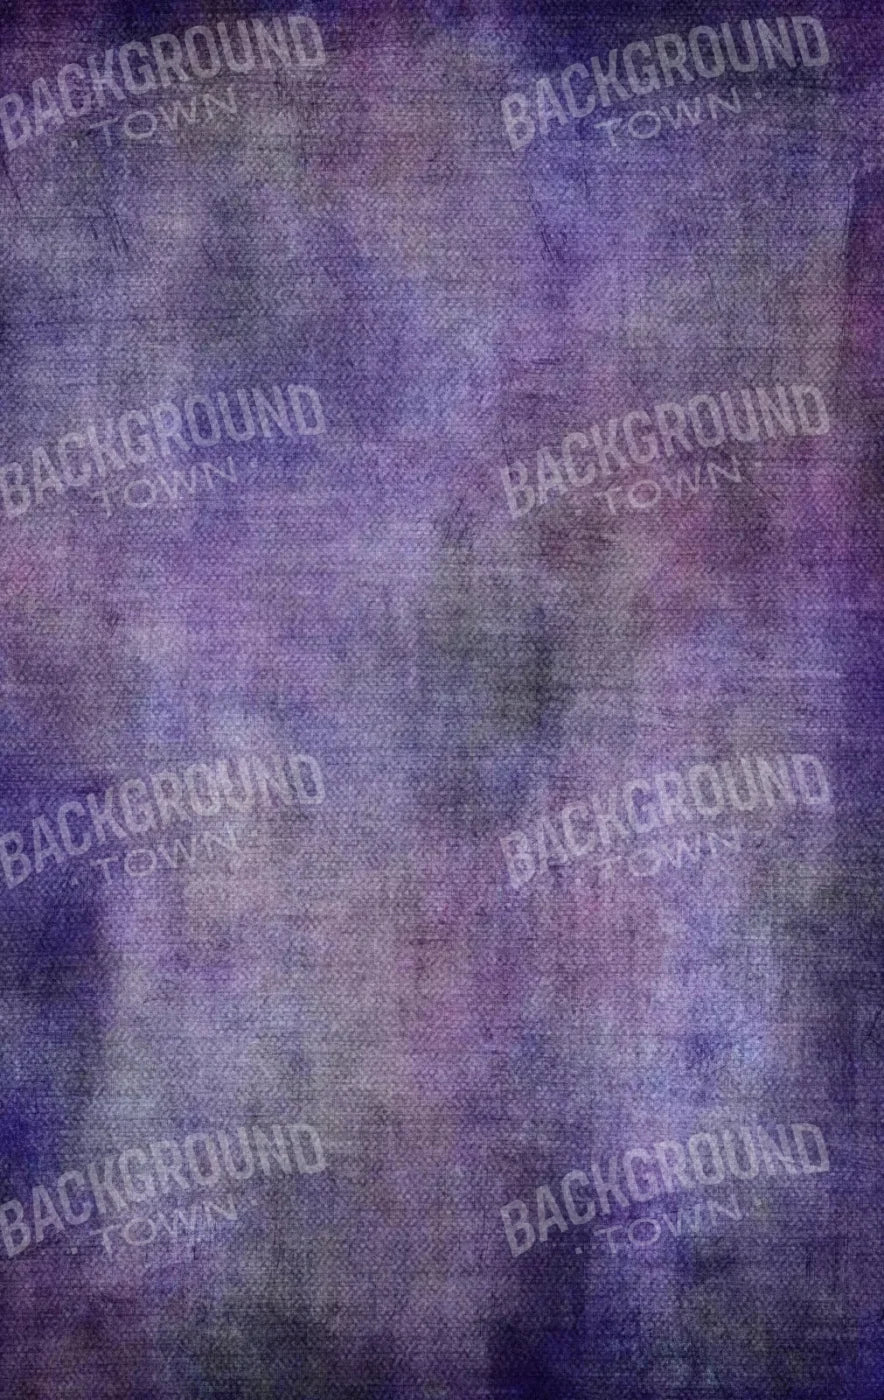 Berrymore 10X16 Ultracloth ( 120 X 192 Inch ) Backdrop